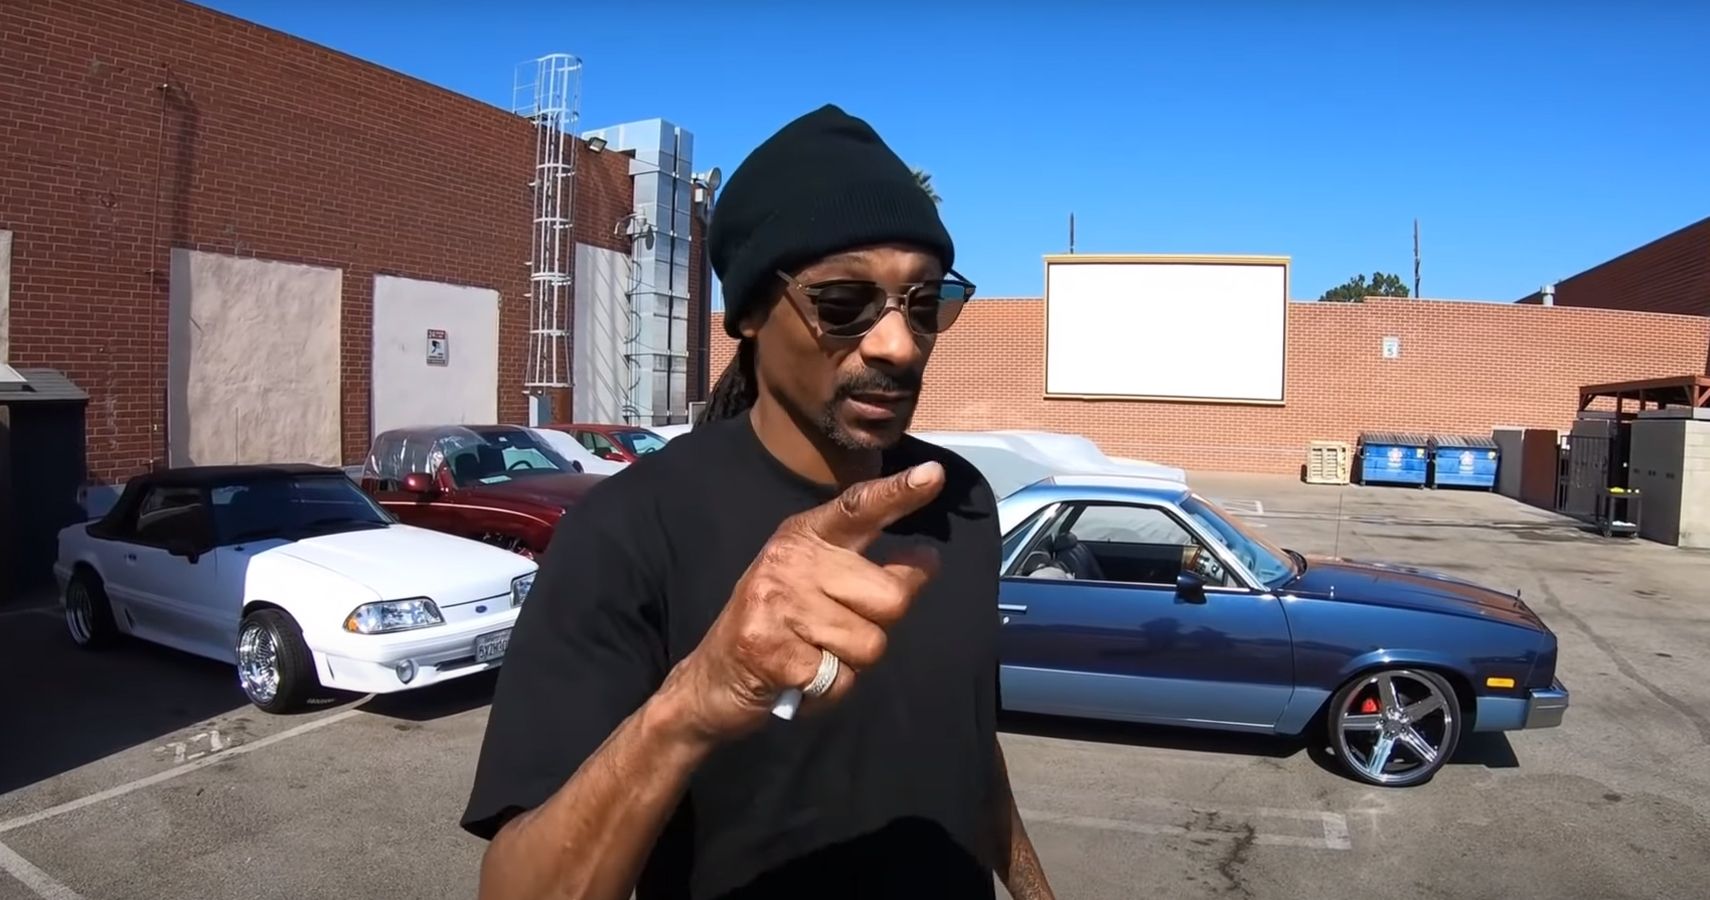 Snoop Dogg poses and points by his El Camino